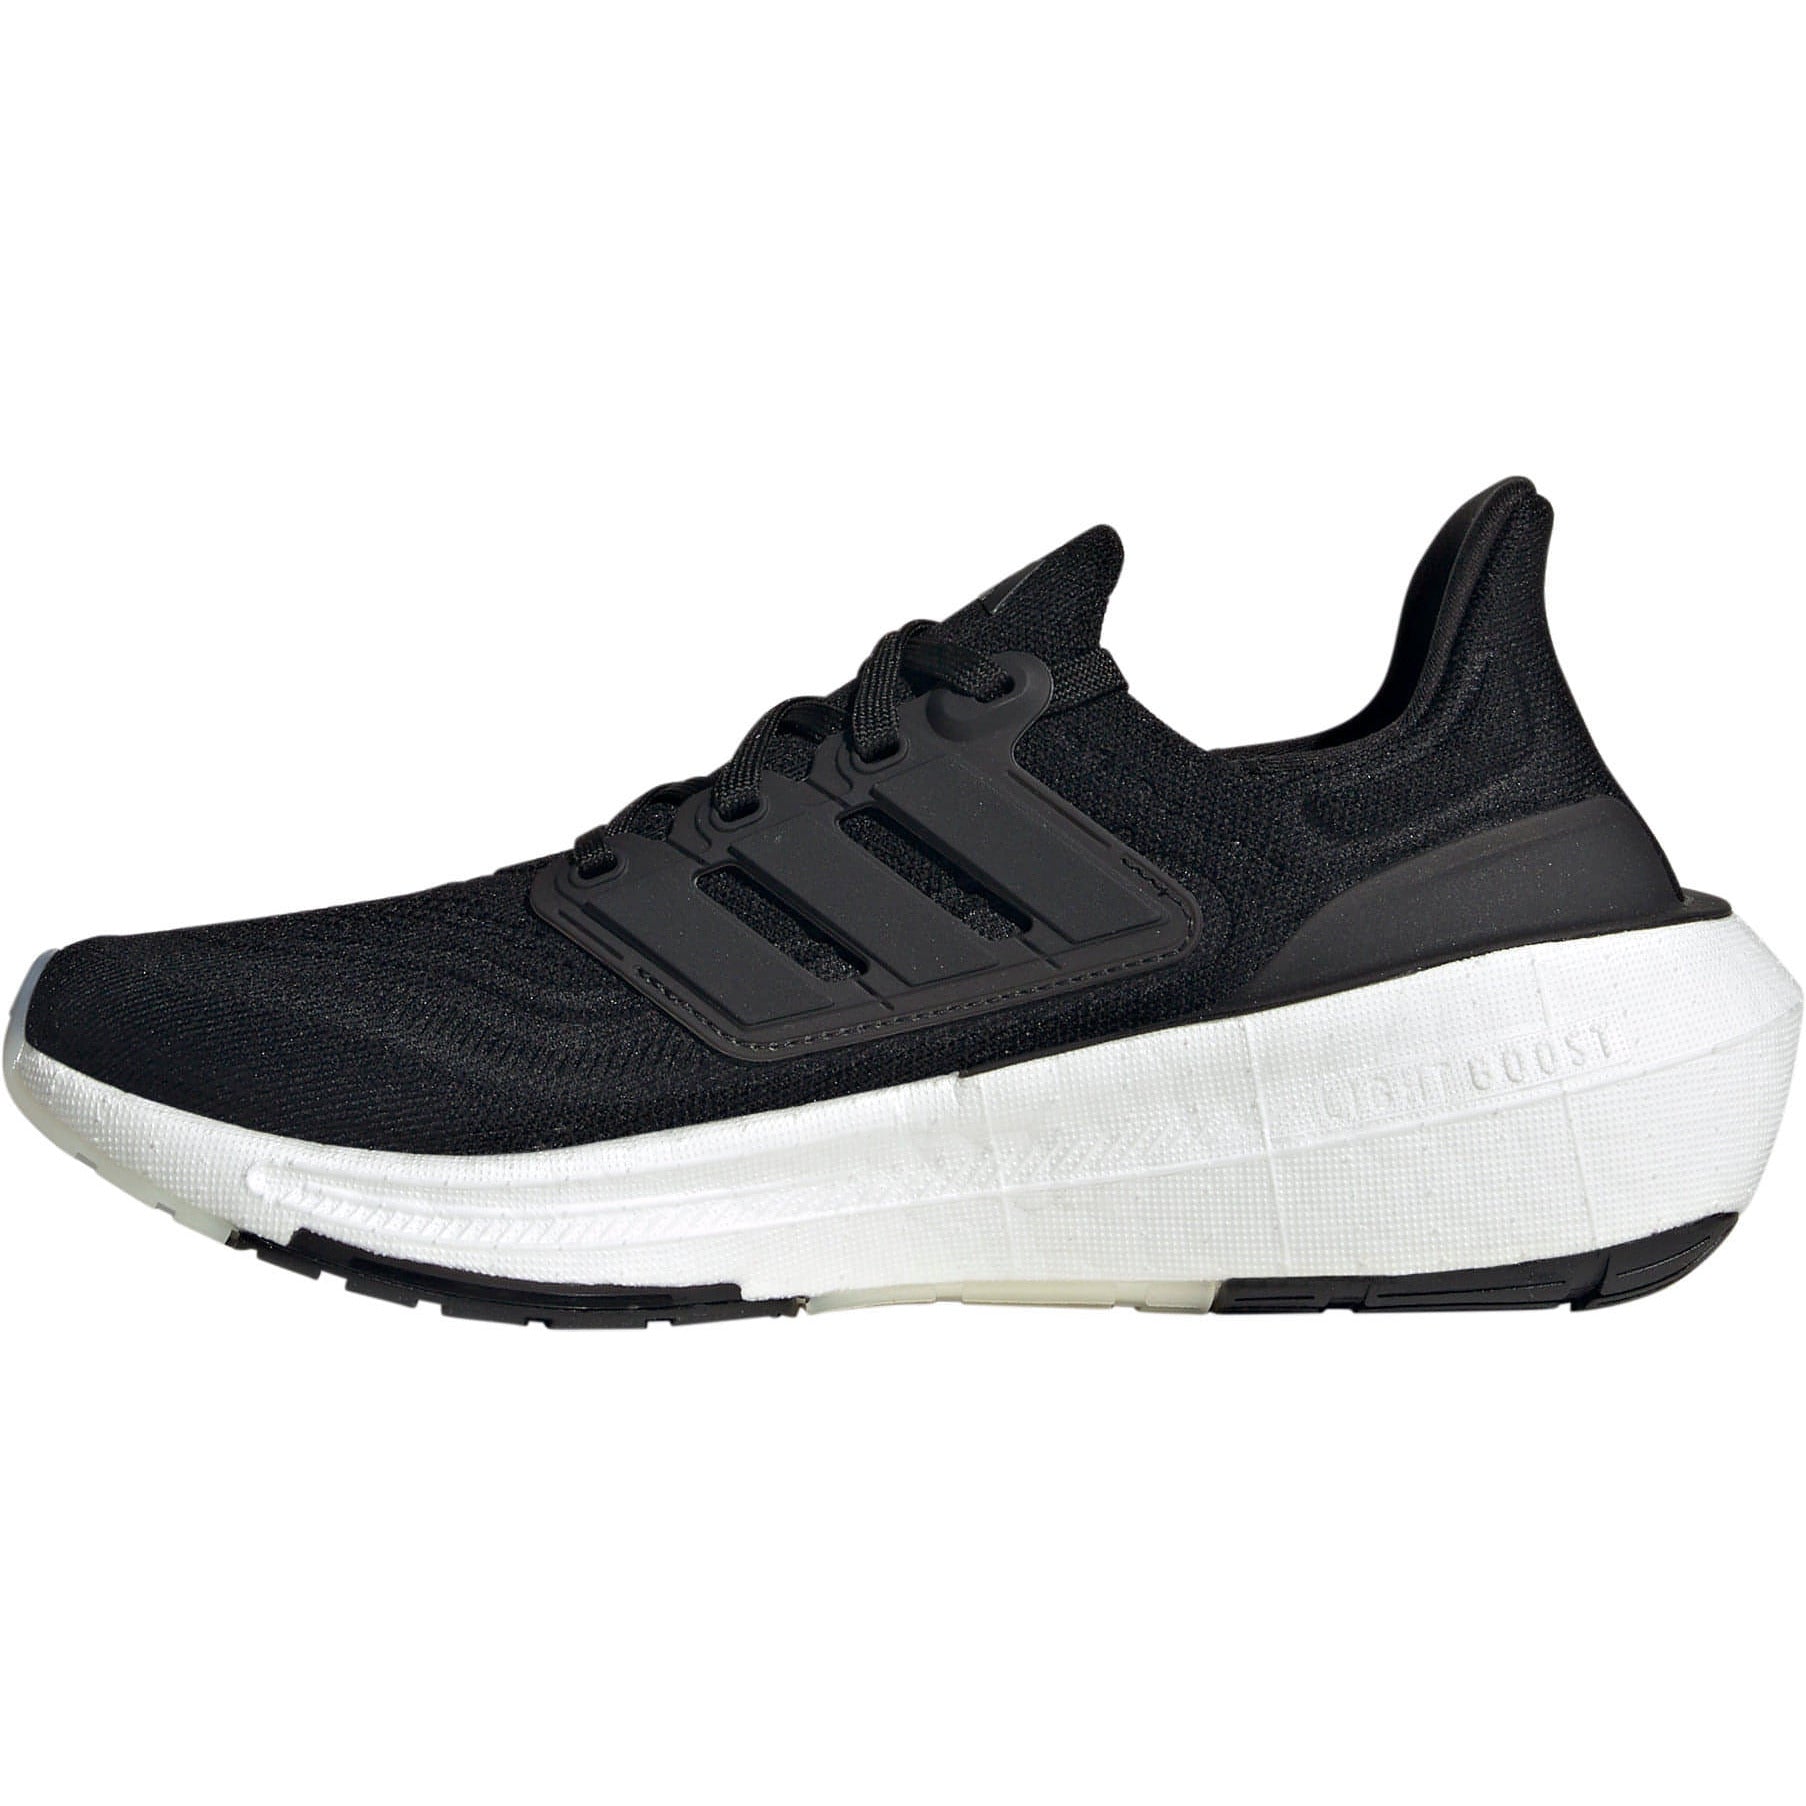 Adidas Ultra Boost Light Gy9353 Inside - Side View